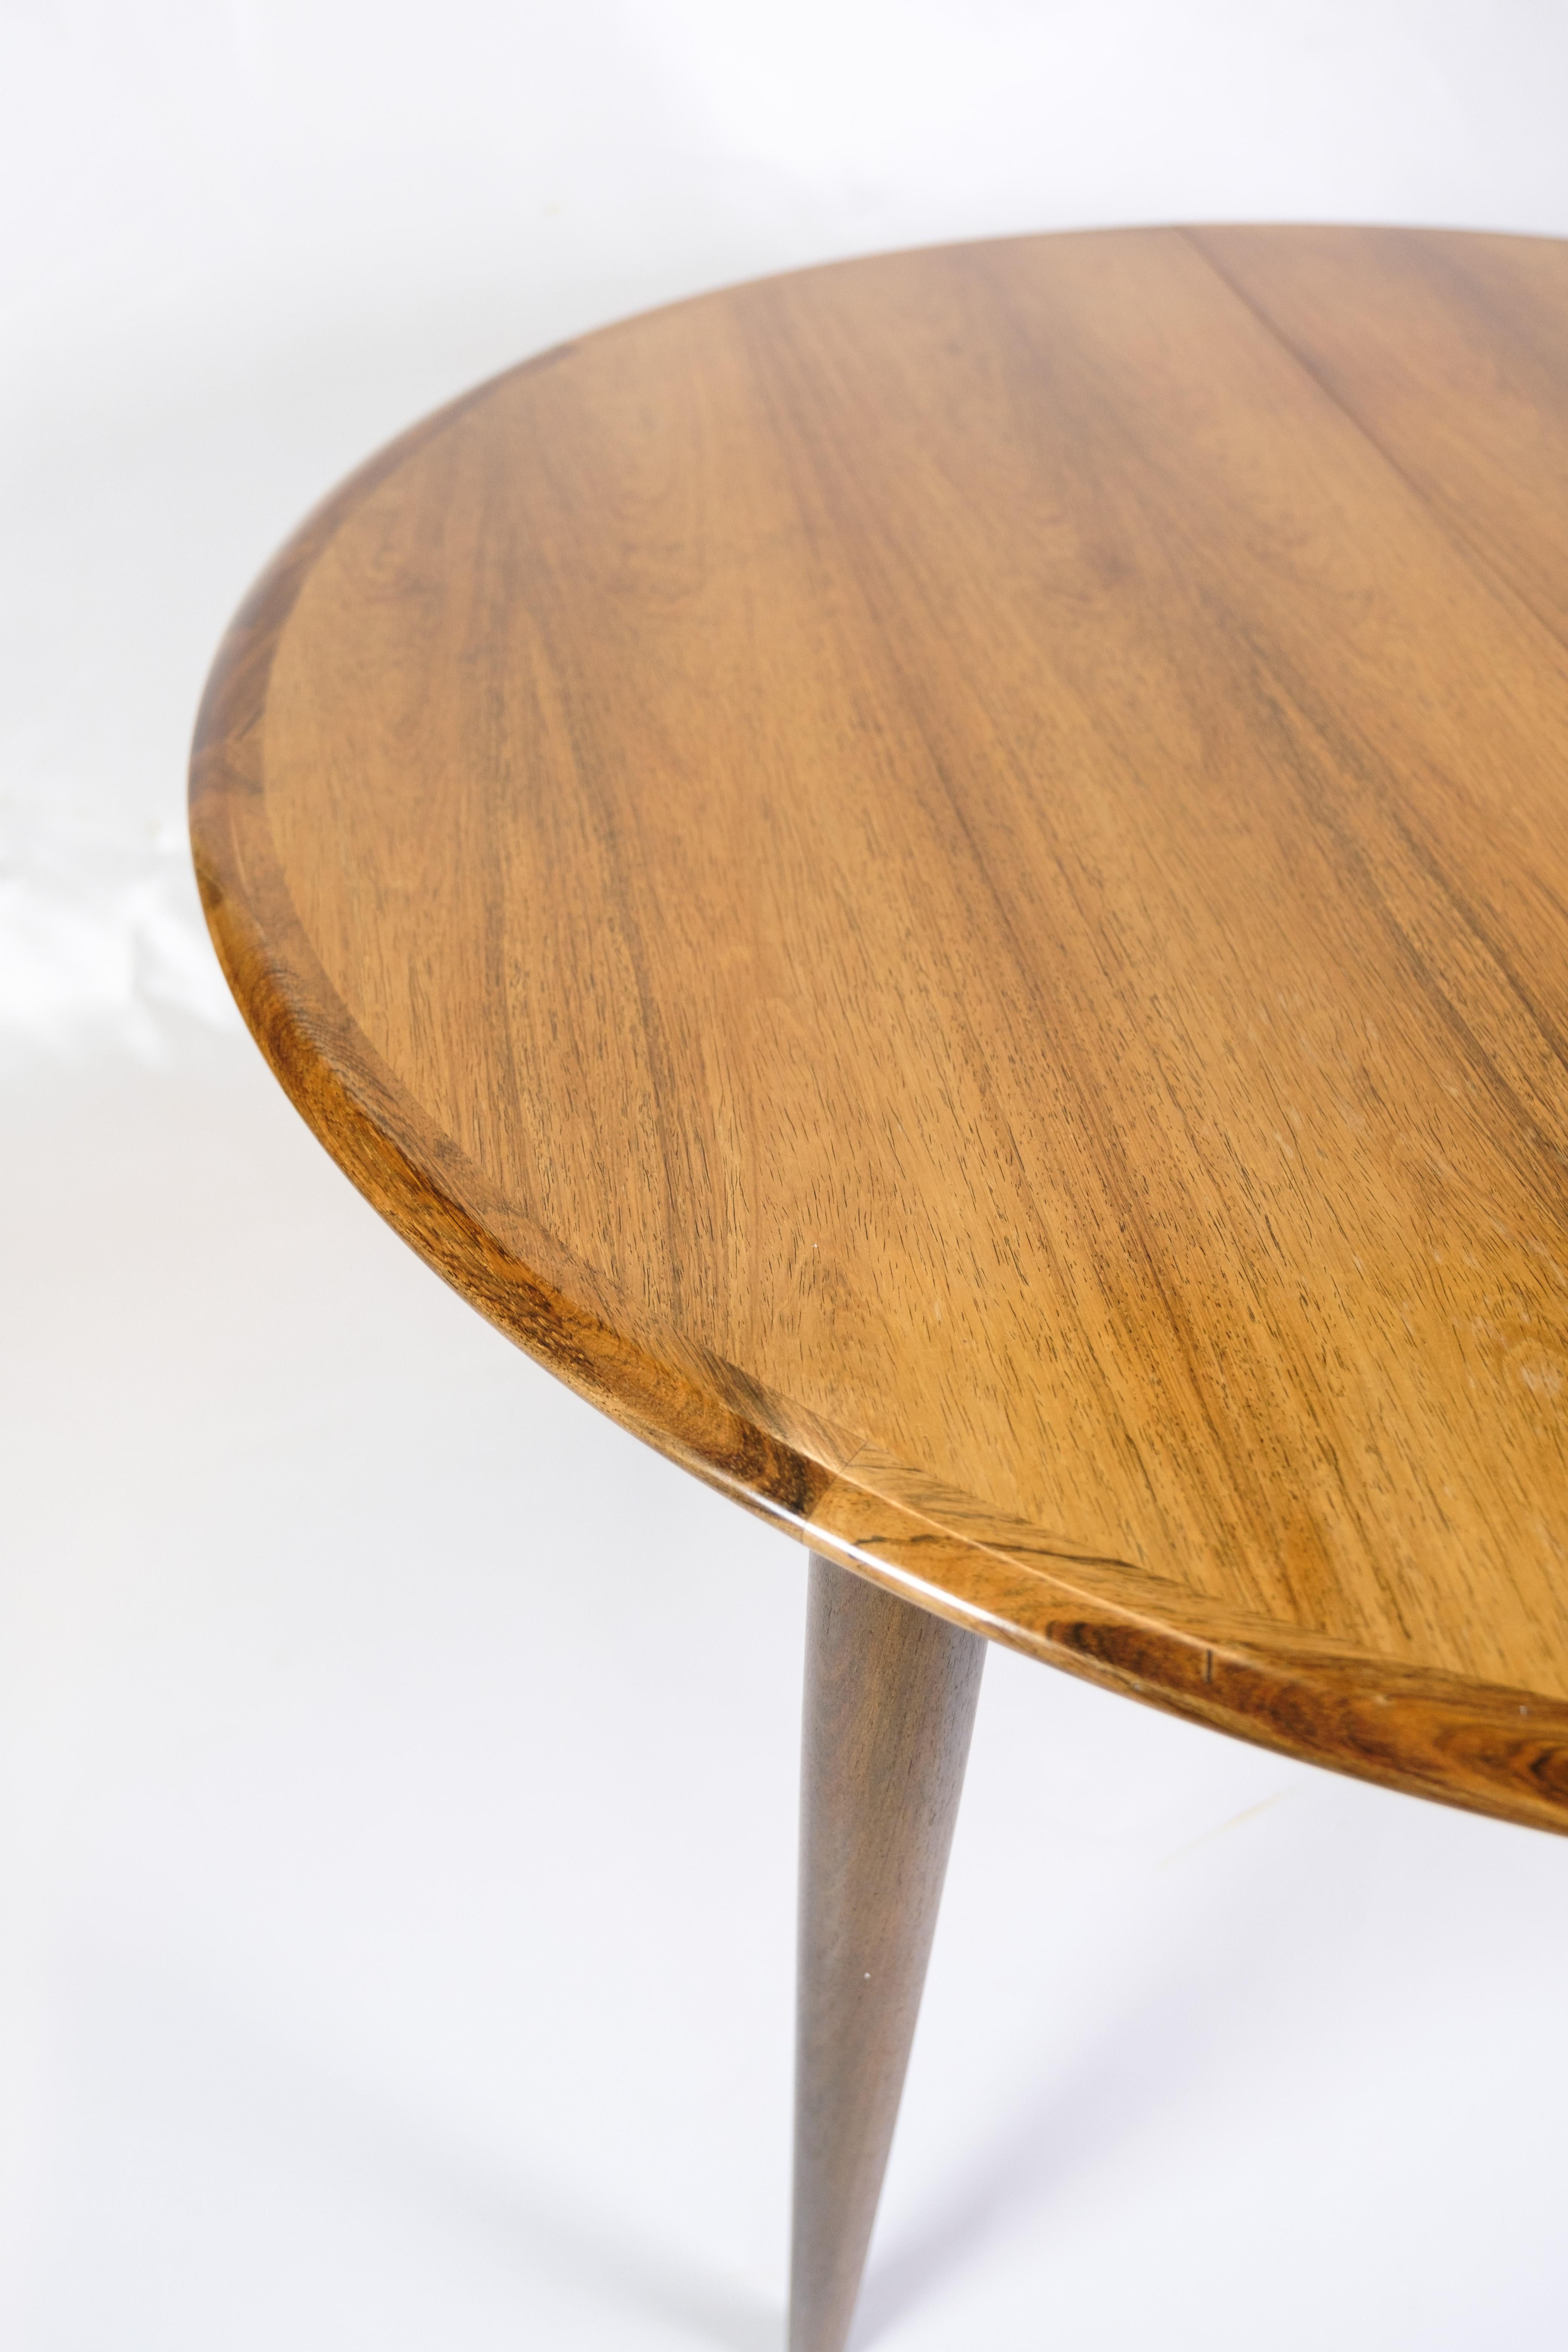 Mid-Century Modern Round Dining Table Made In Rosewood By Arne Vodder From 1960s For Sale